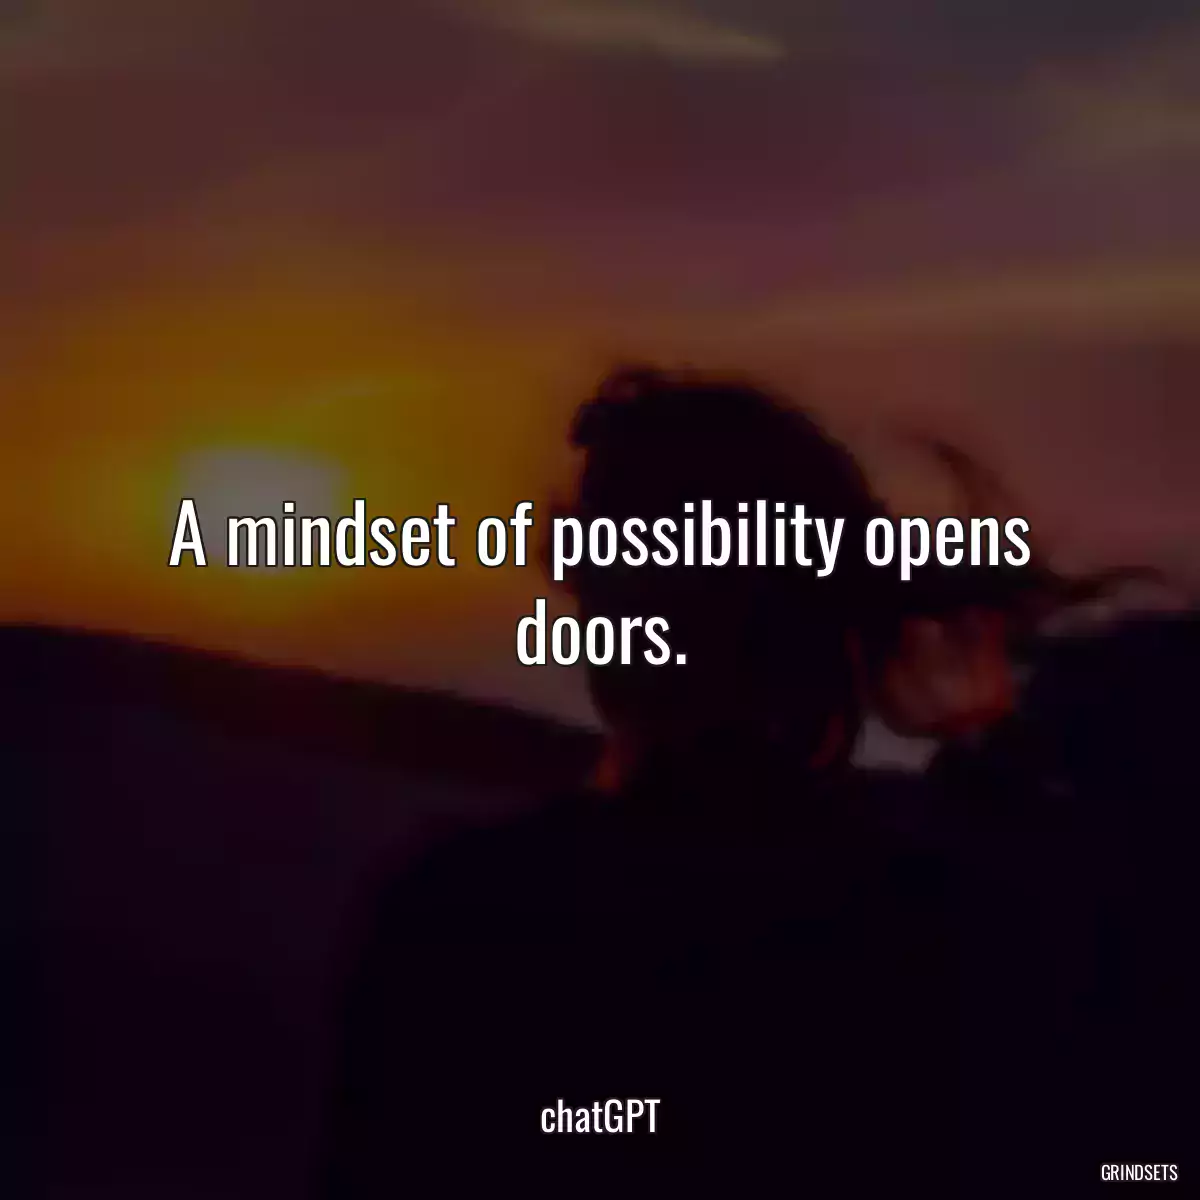 A mindset of possibility opens doors.